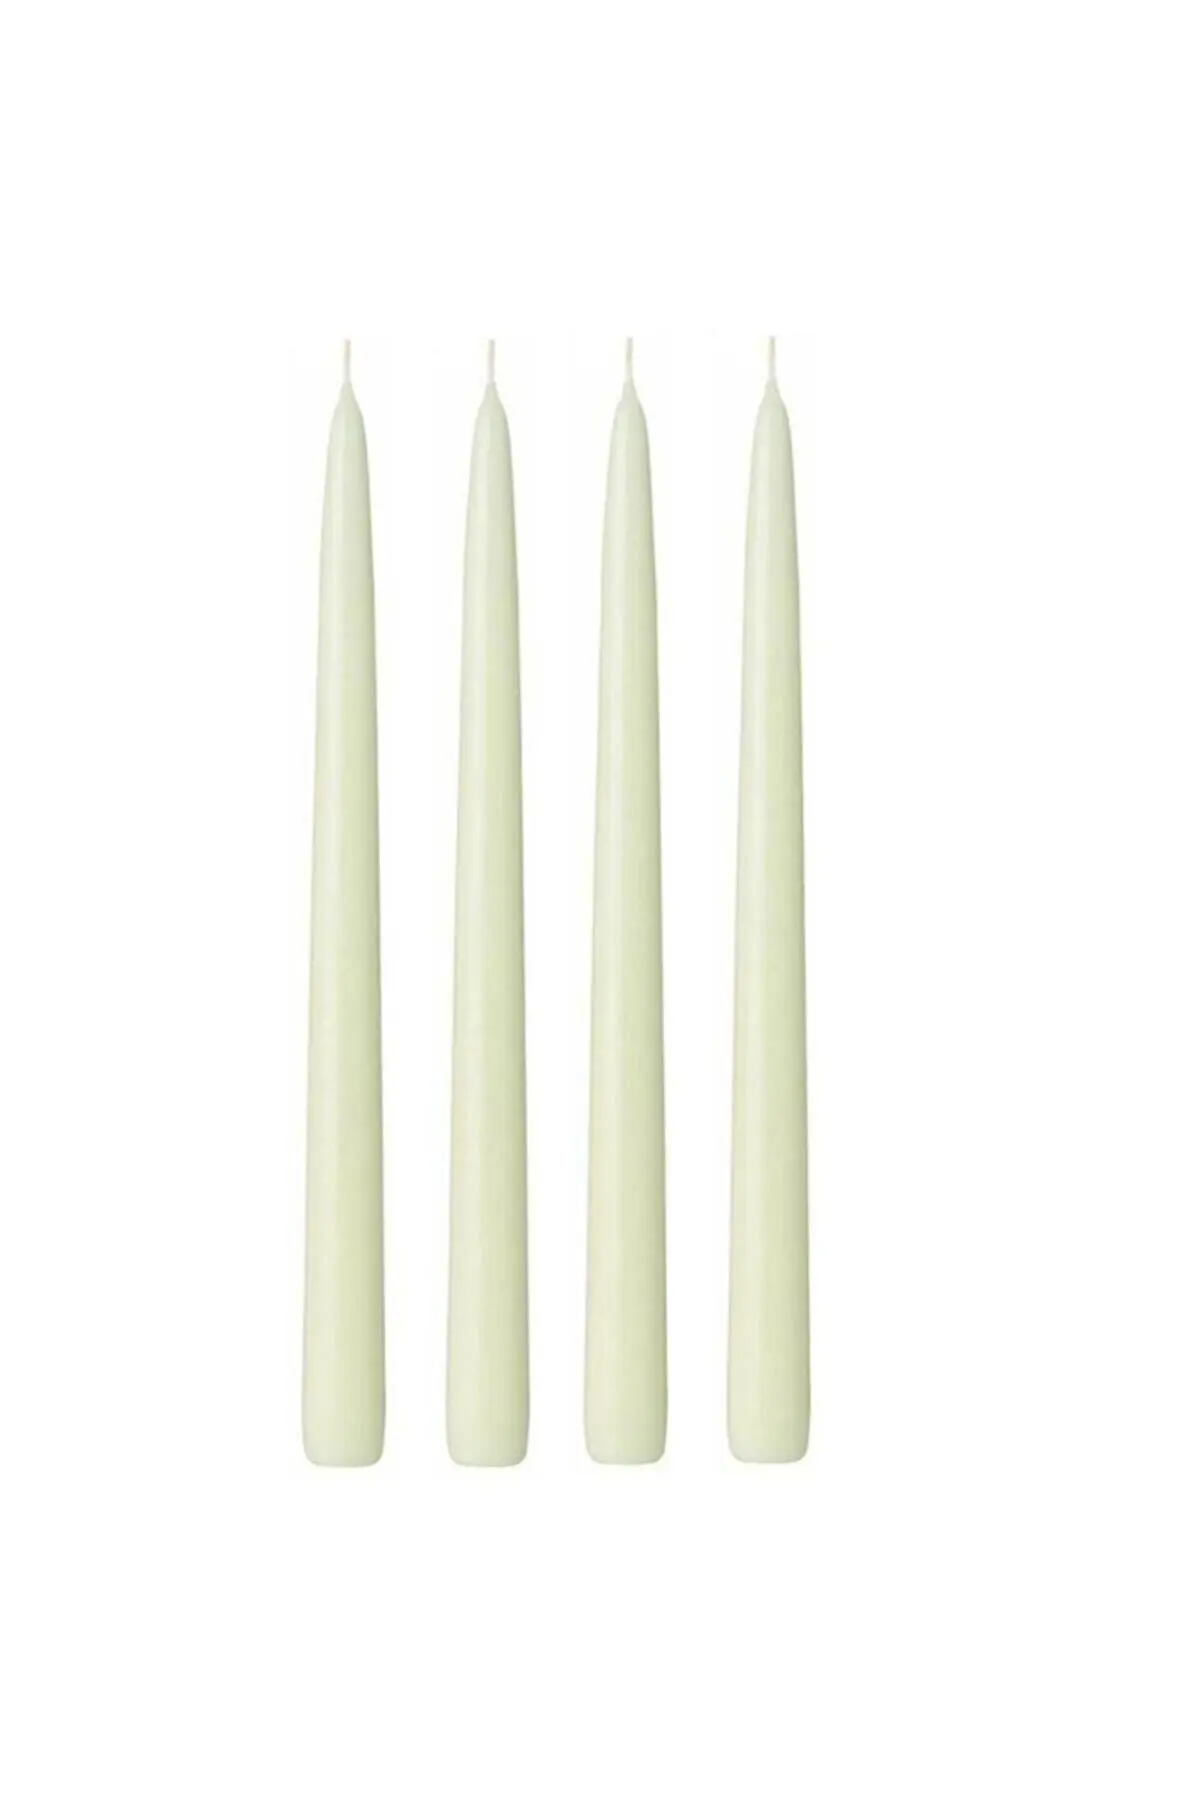 

4 pcs White Taper Candlestick Candle Bridal Jewelry For Wedding Gift Candles Henna Night